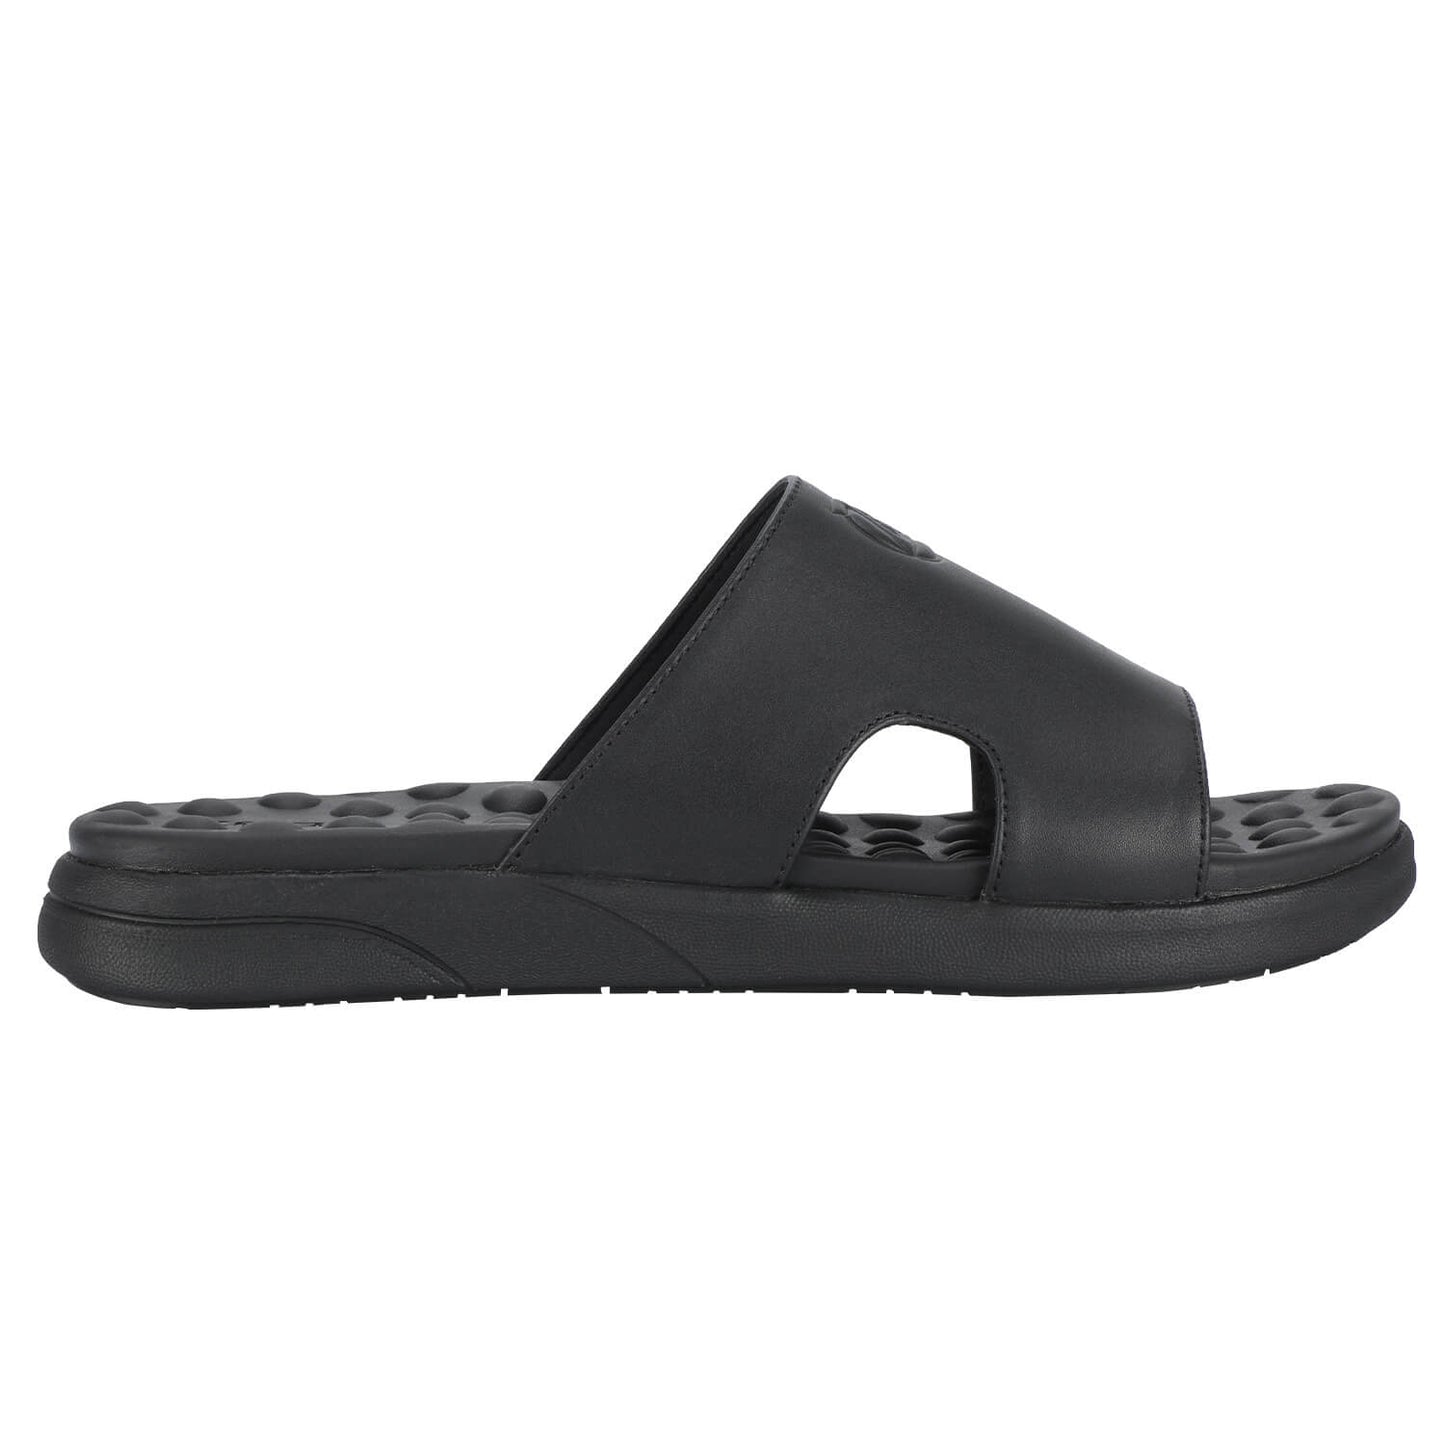 Black Massaging Leather Sandals (Sizes 7-16 Available)